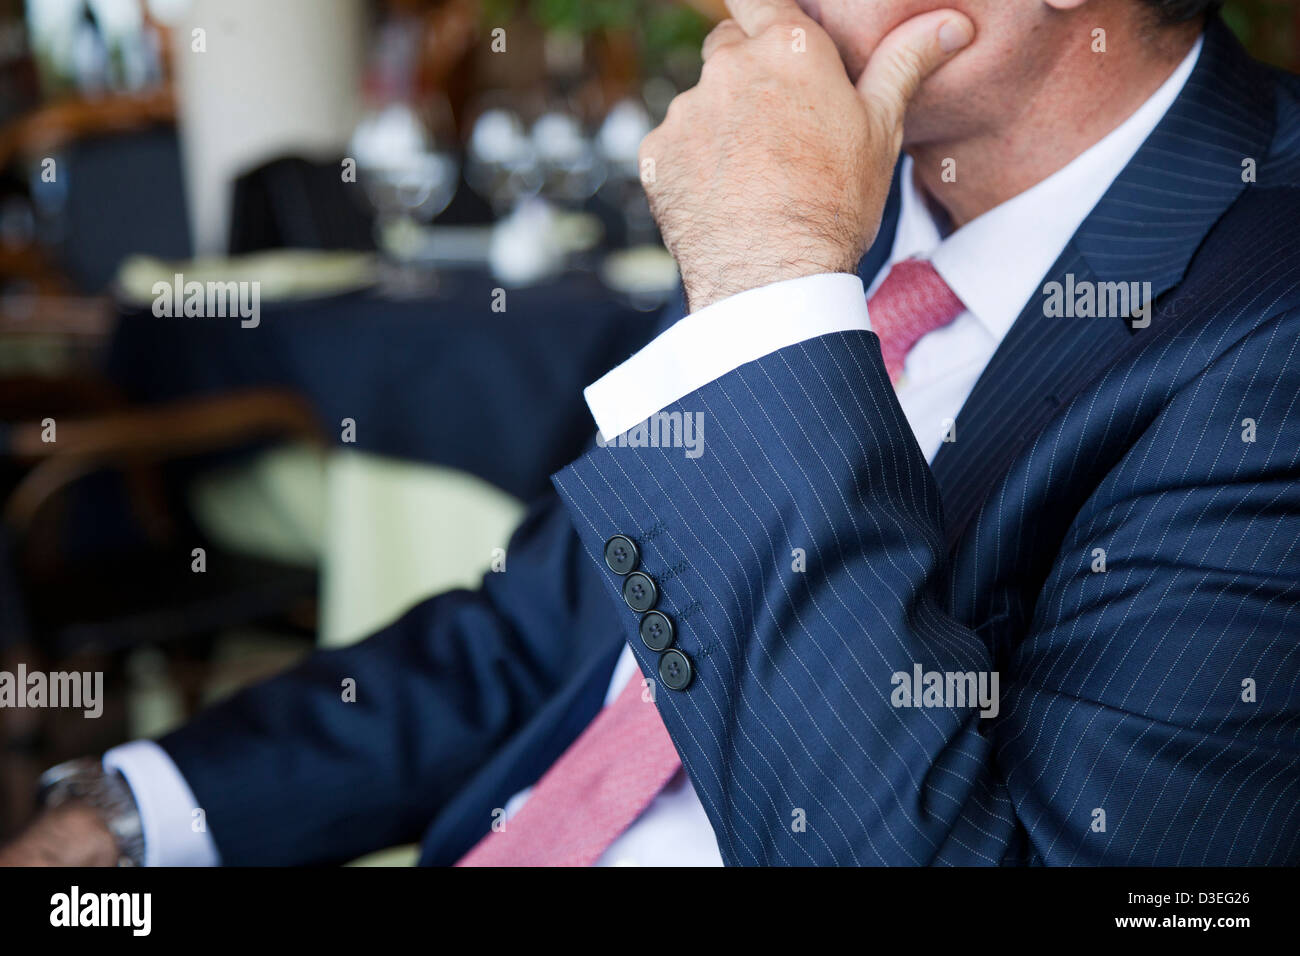 Businessman considering the situation seated a at at table in a restaurant during a business lunch. Stock Photo